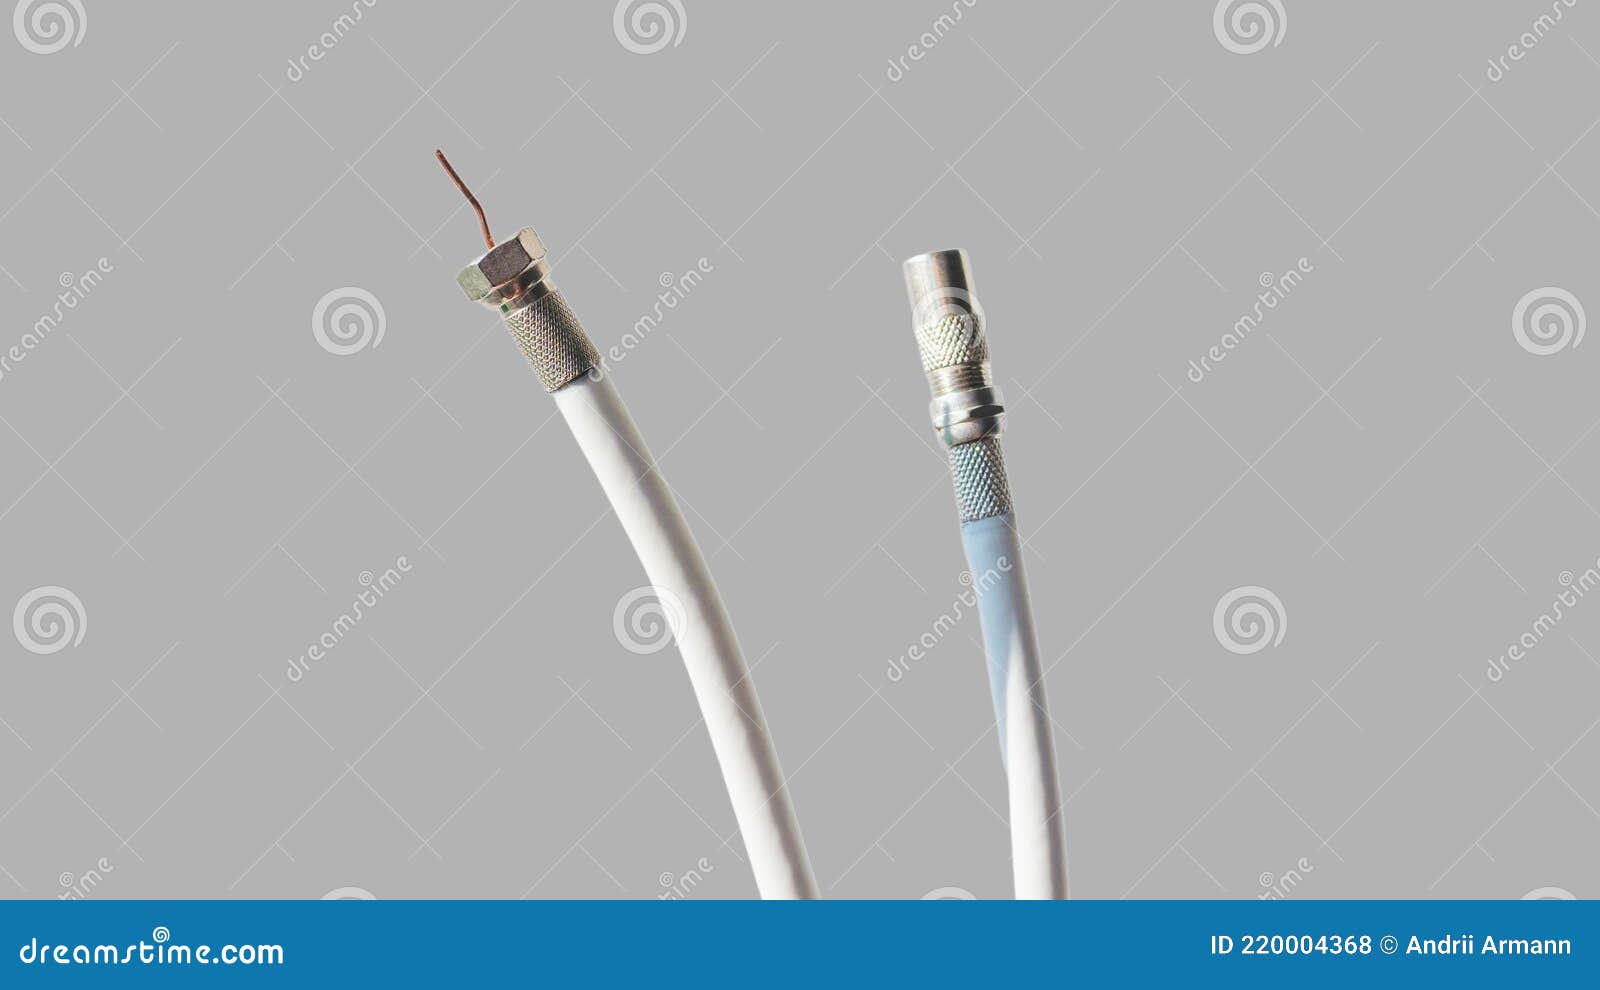 antenna and tv cord on a gray background. pal antenna cable, plug, antenna cord, type f, coaxial cable